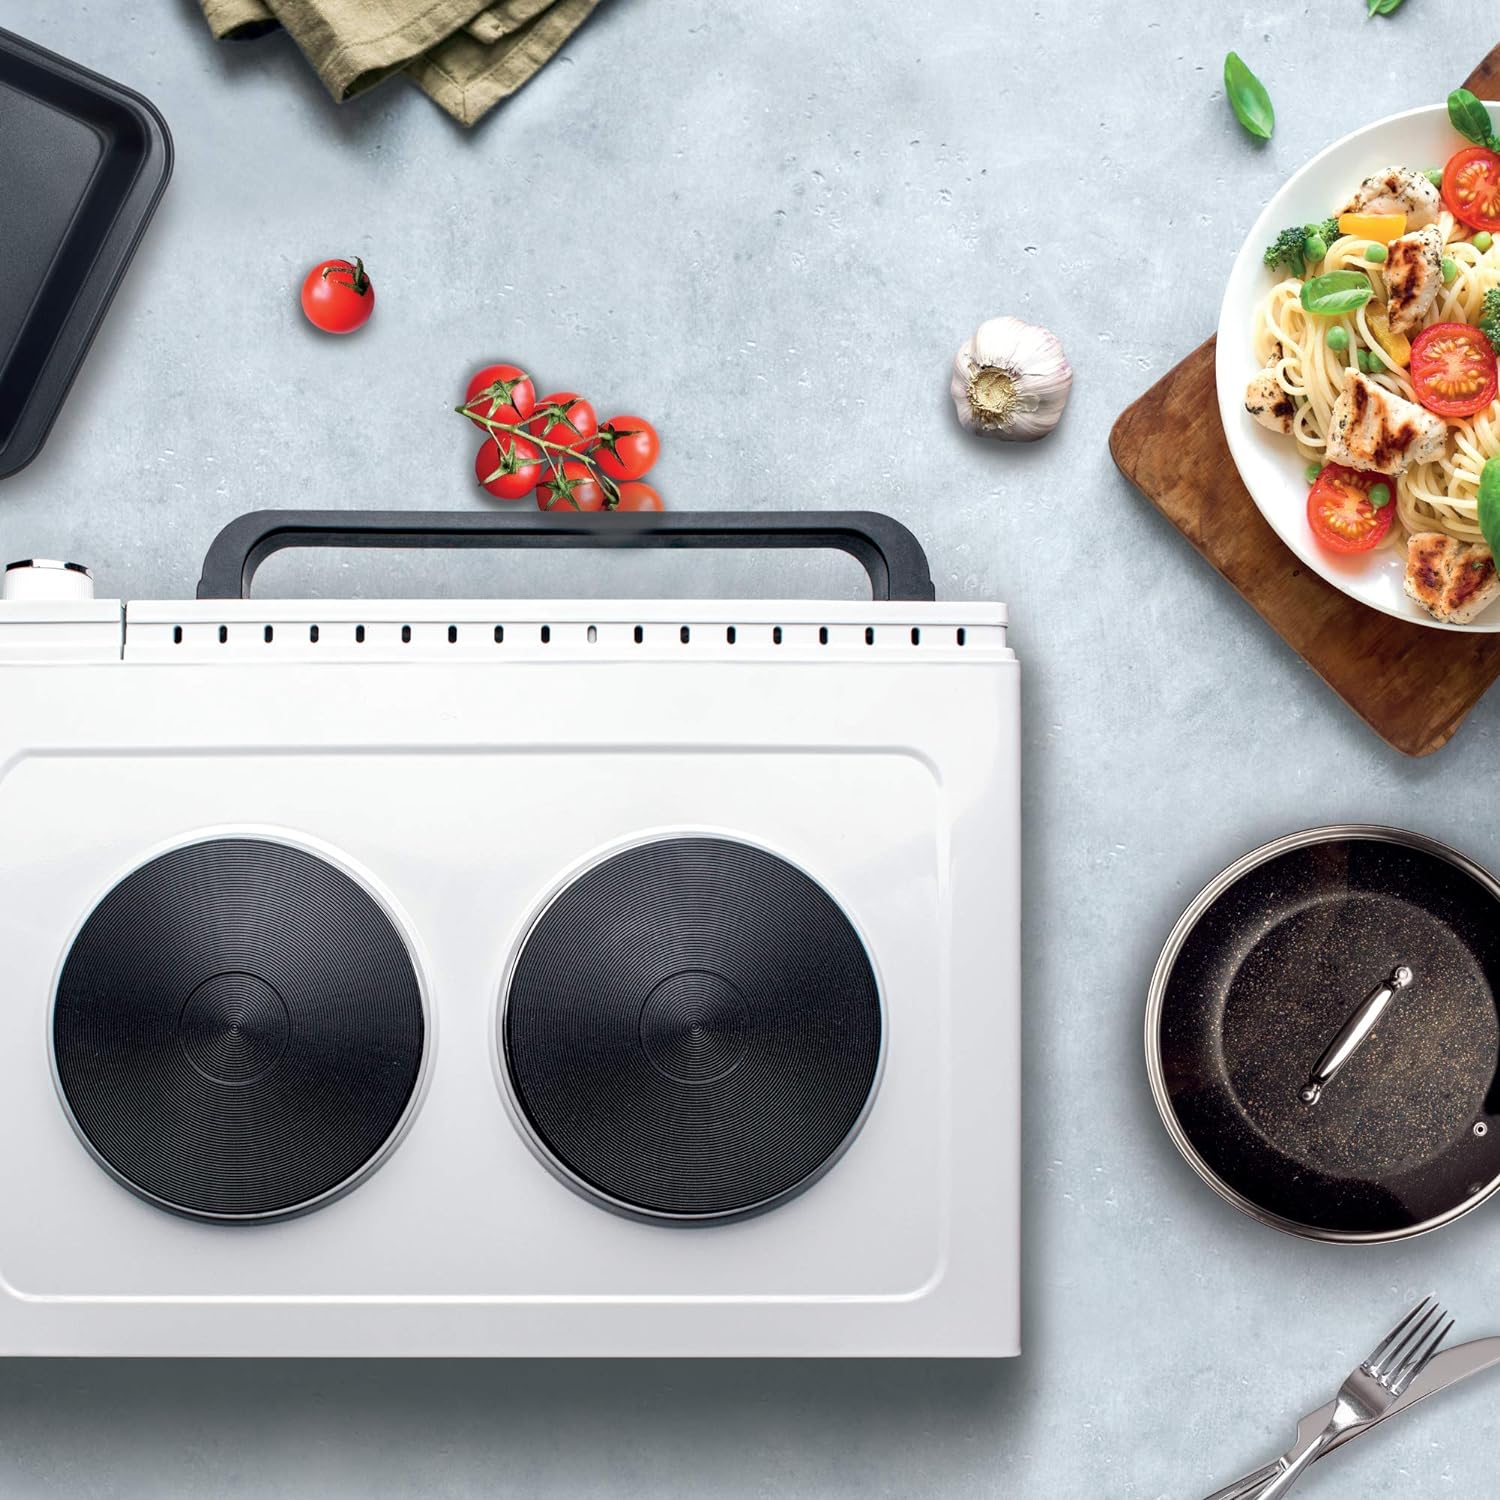 All-in-One Mini Oven with Hob: Our 25L Haden electric mini oven with a built-in grill and hob offers versatile cooking, from baking to roasting, on any countertop or table top.